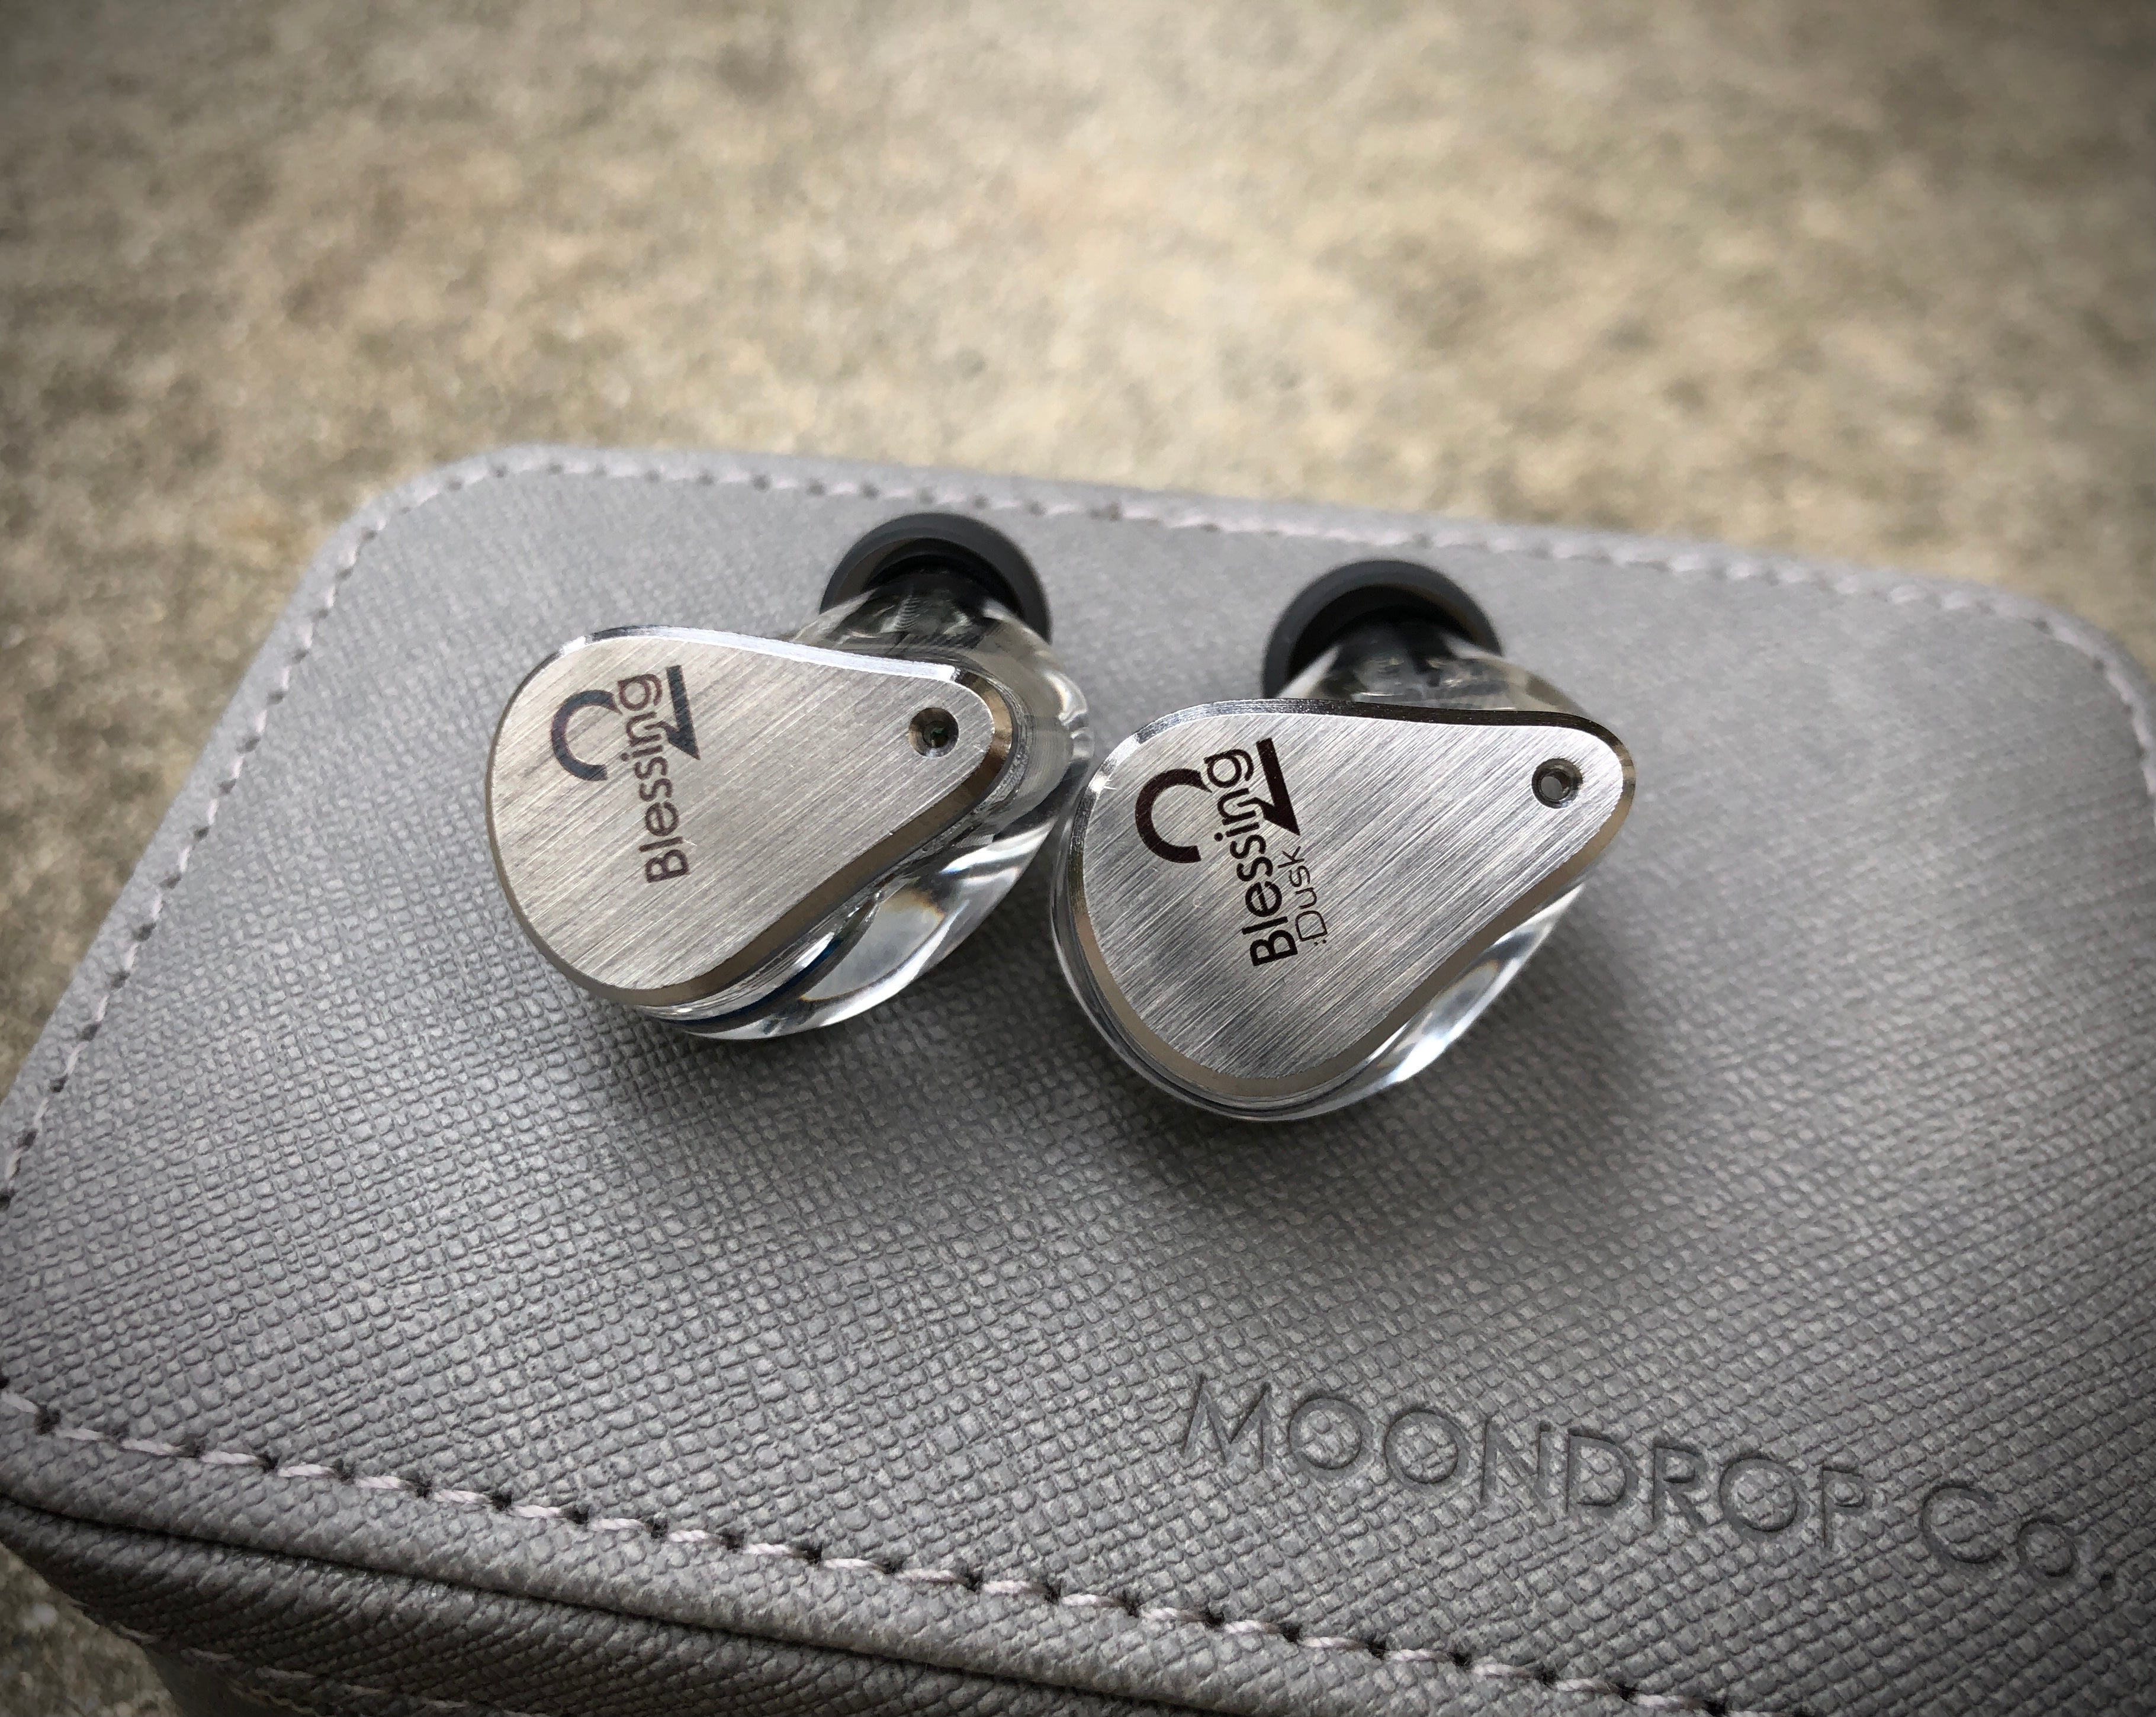 Truthear x Crinacle Zero IEM Review: Moondrop Chu, Blessing 2, Variations,  and Dunu Titan S Comparison — Eightify